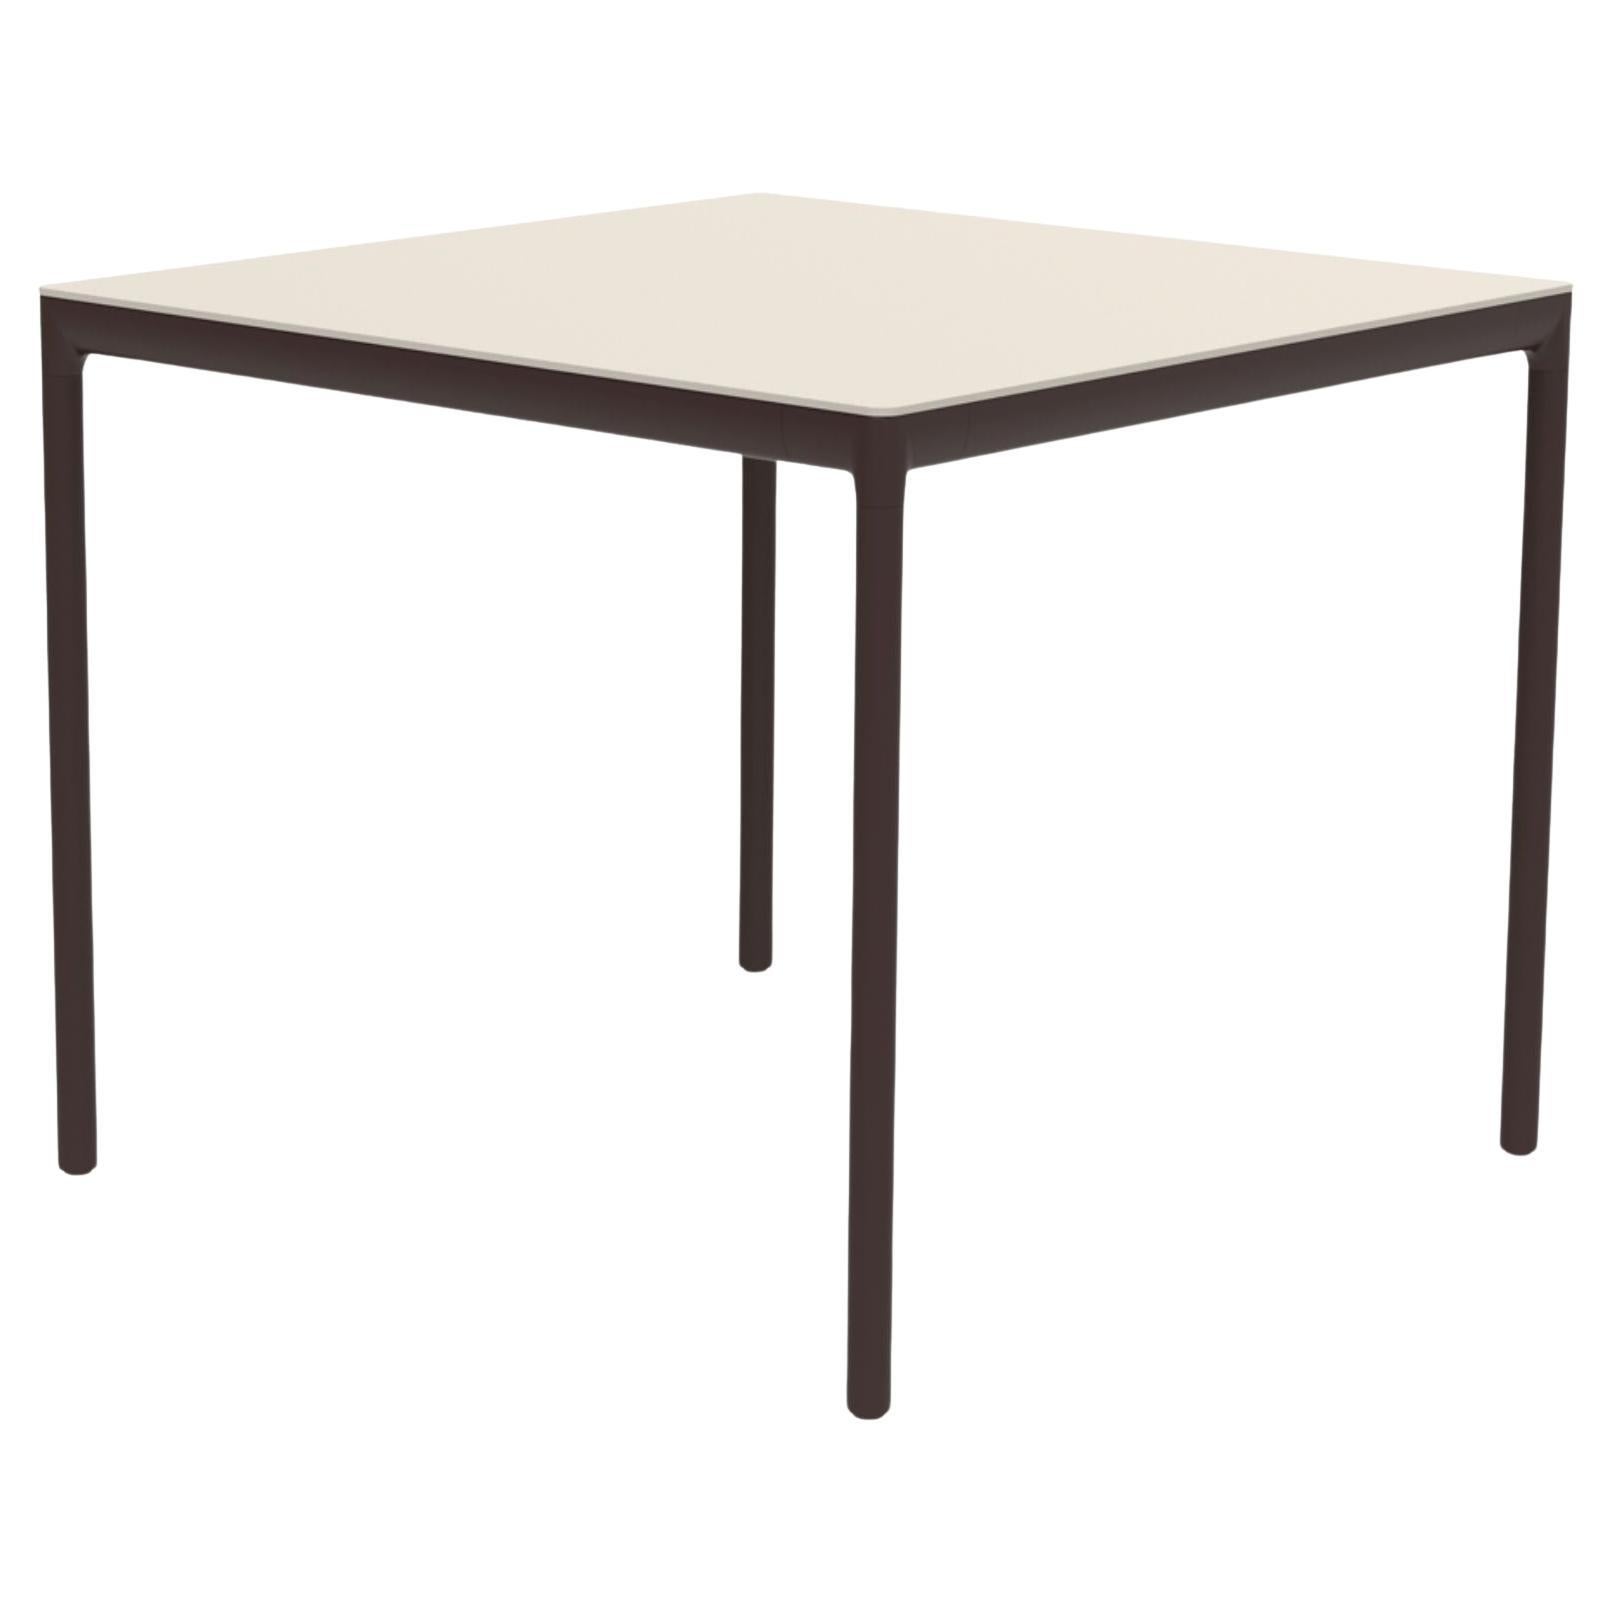 Ribbons Chocolate 90 Table by Mowee For Sale